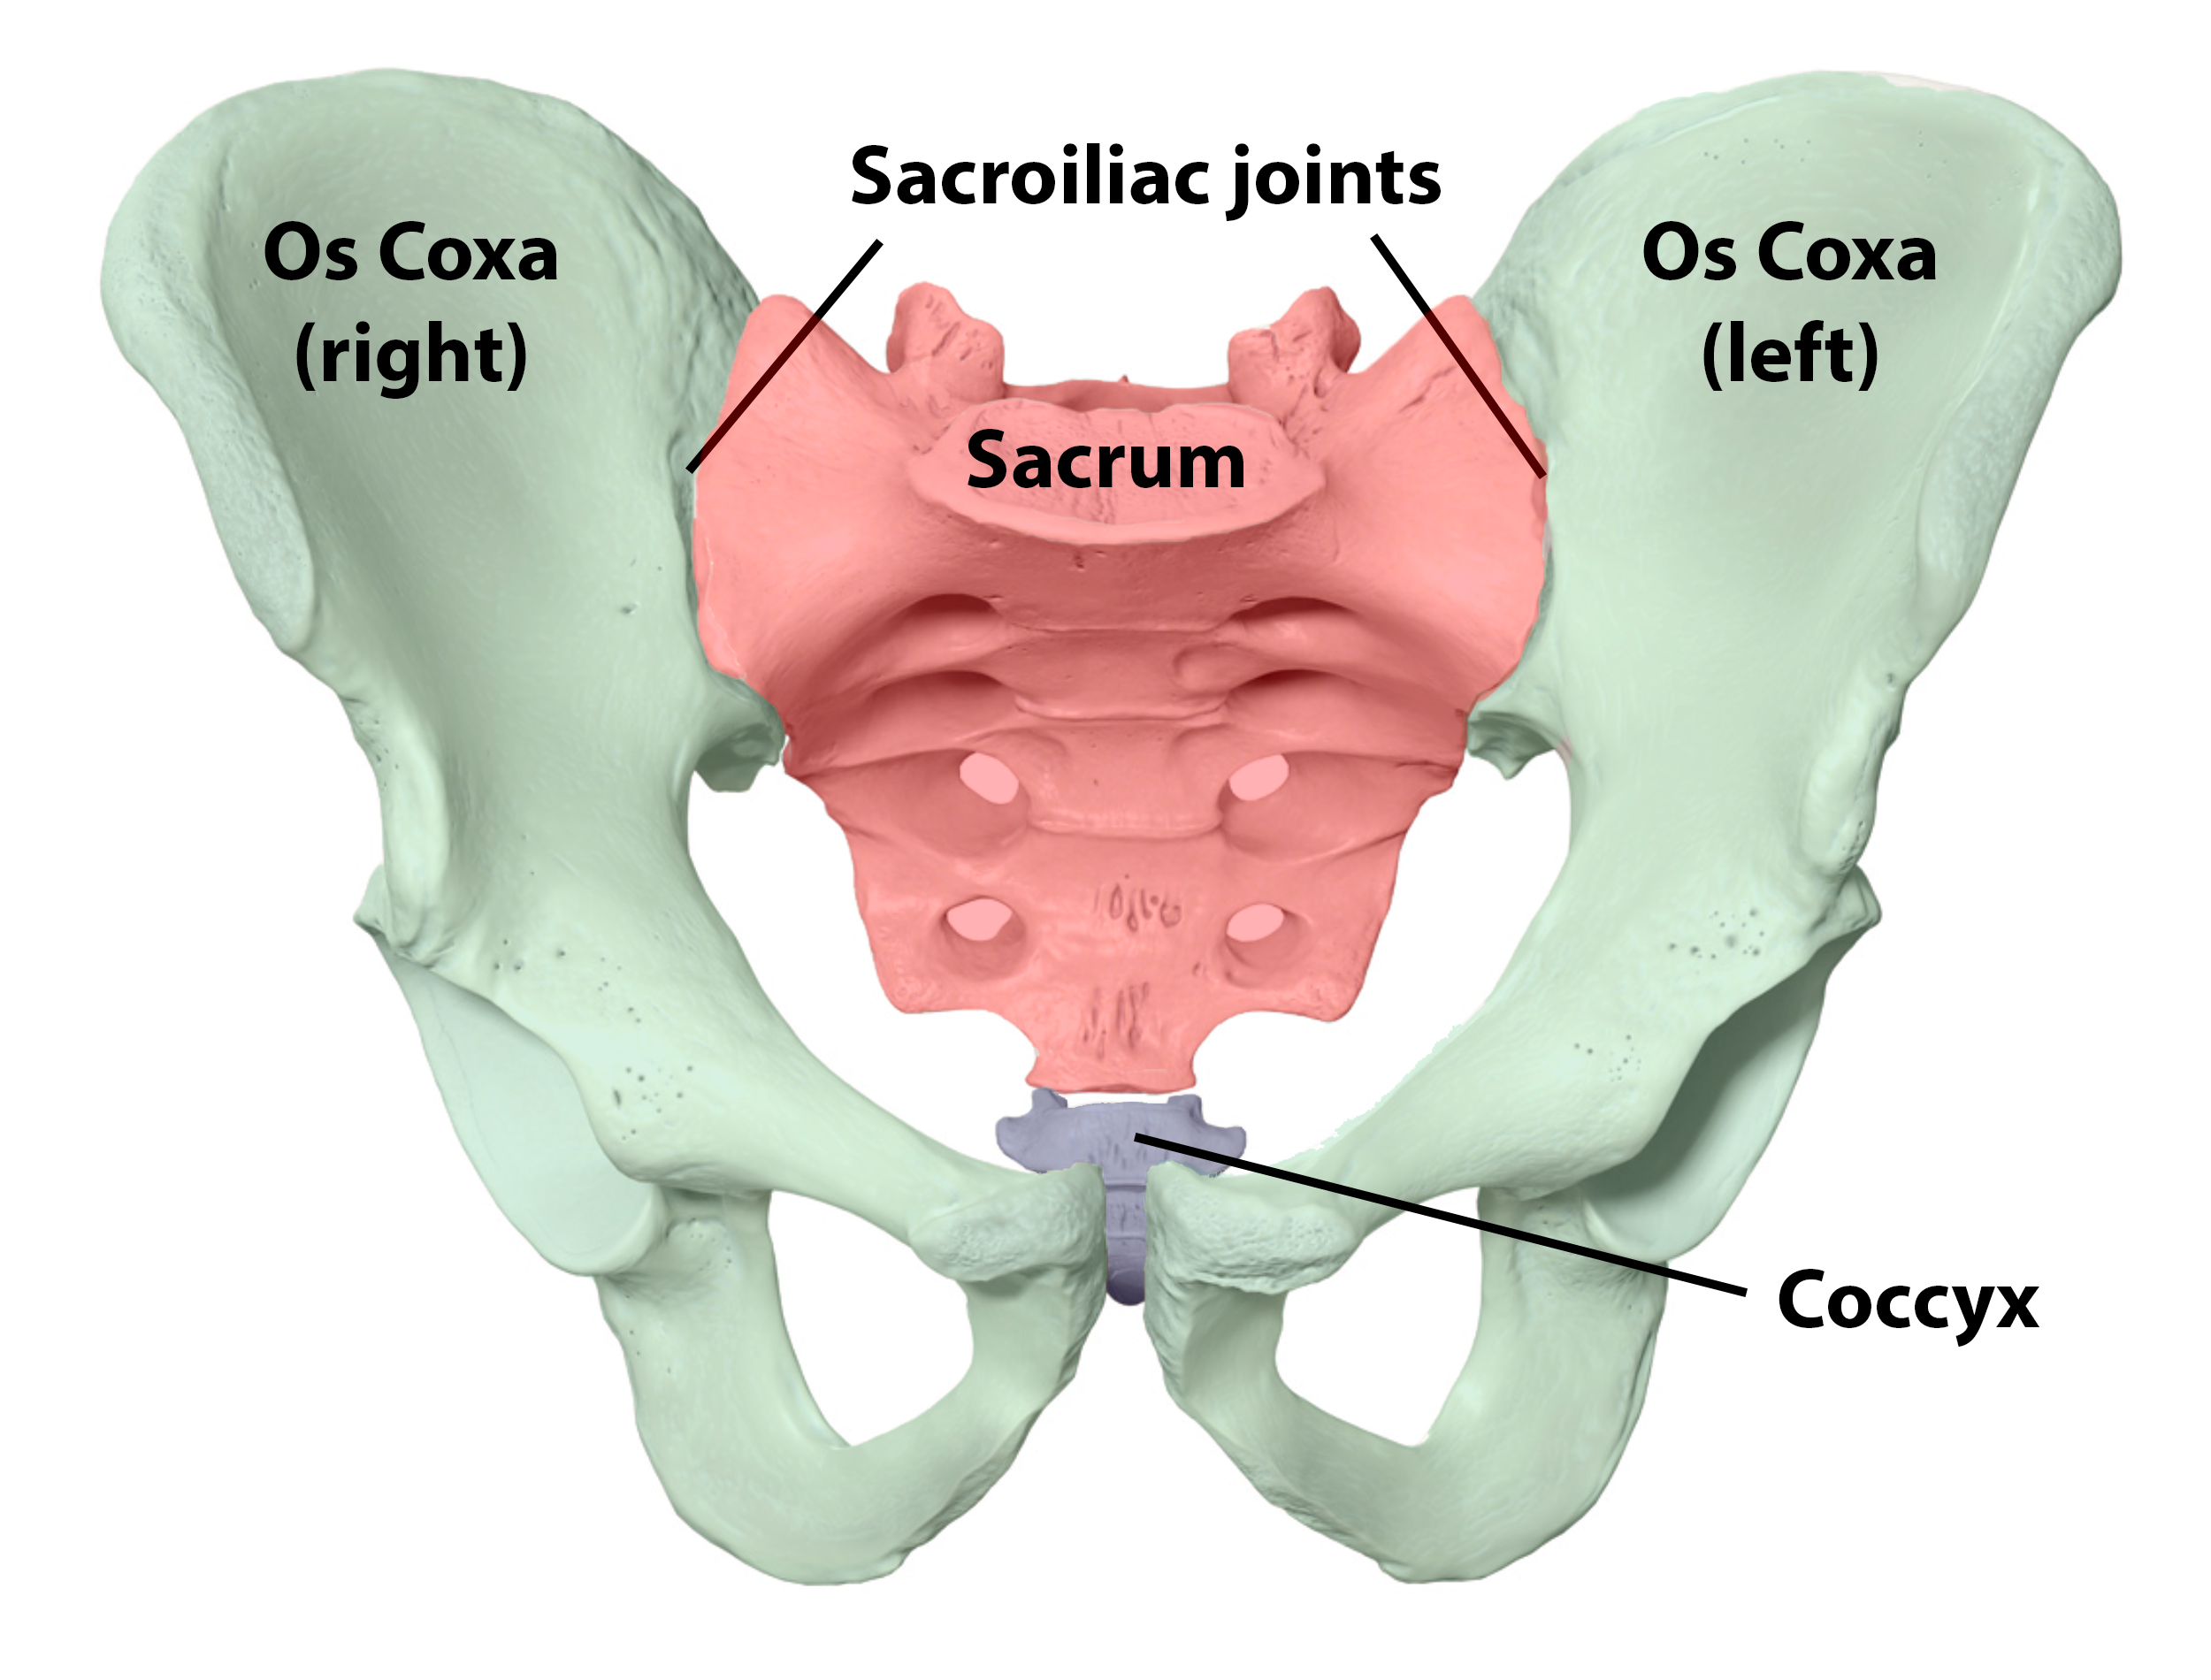 Lab 5 Bones and Features of the Pelvic Girdle Diagram